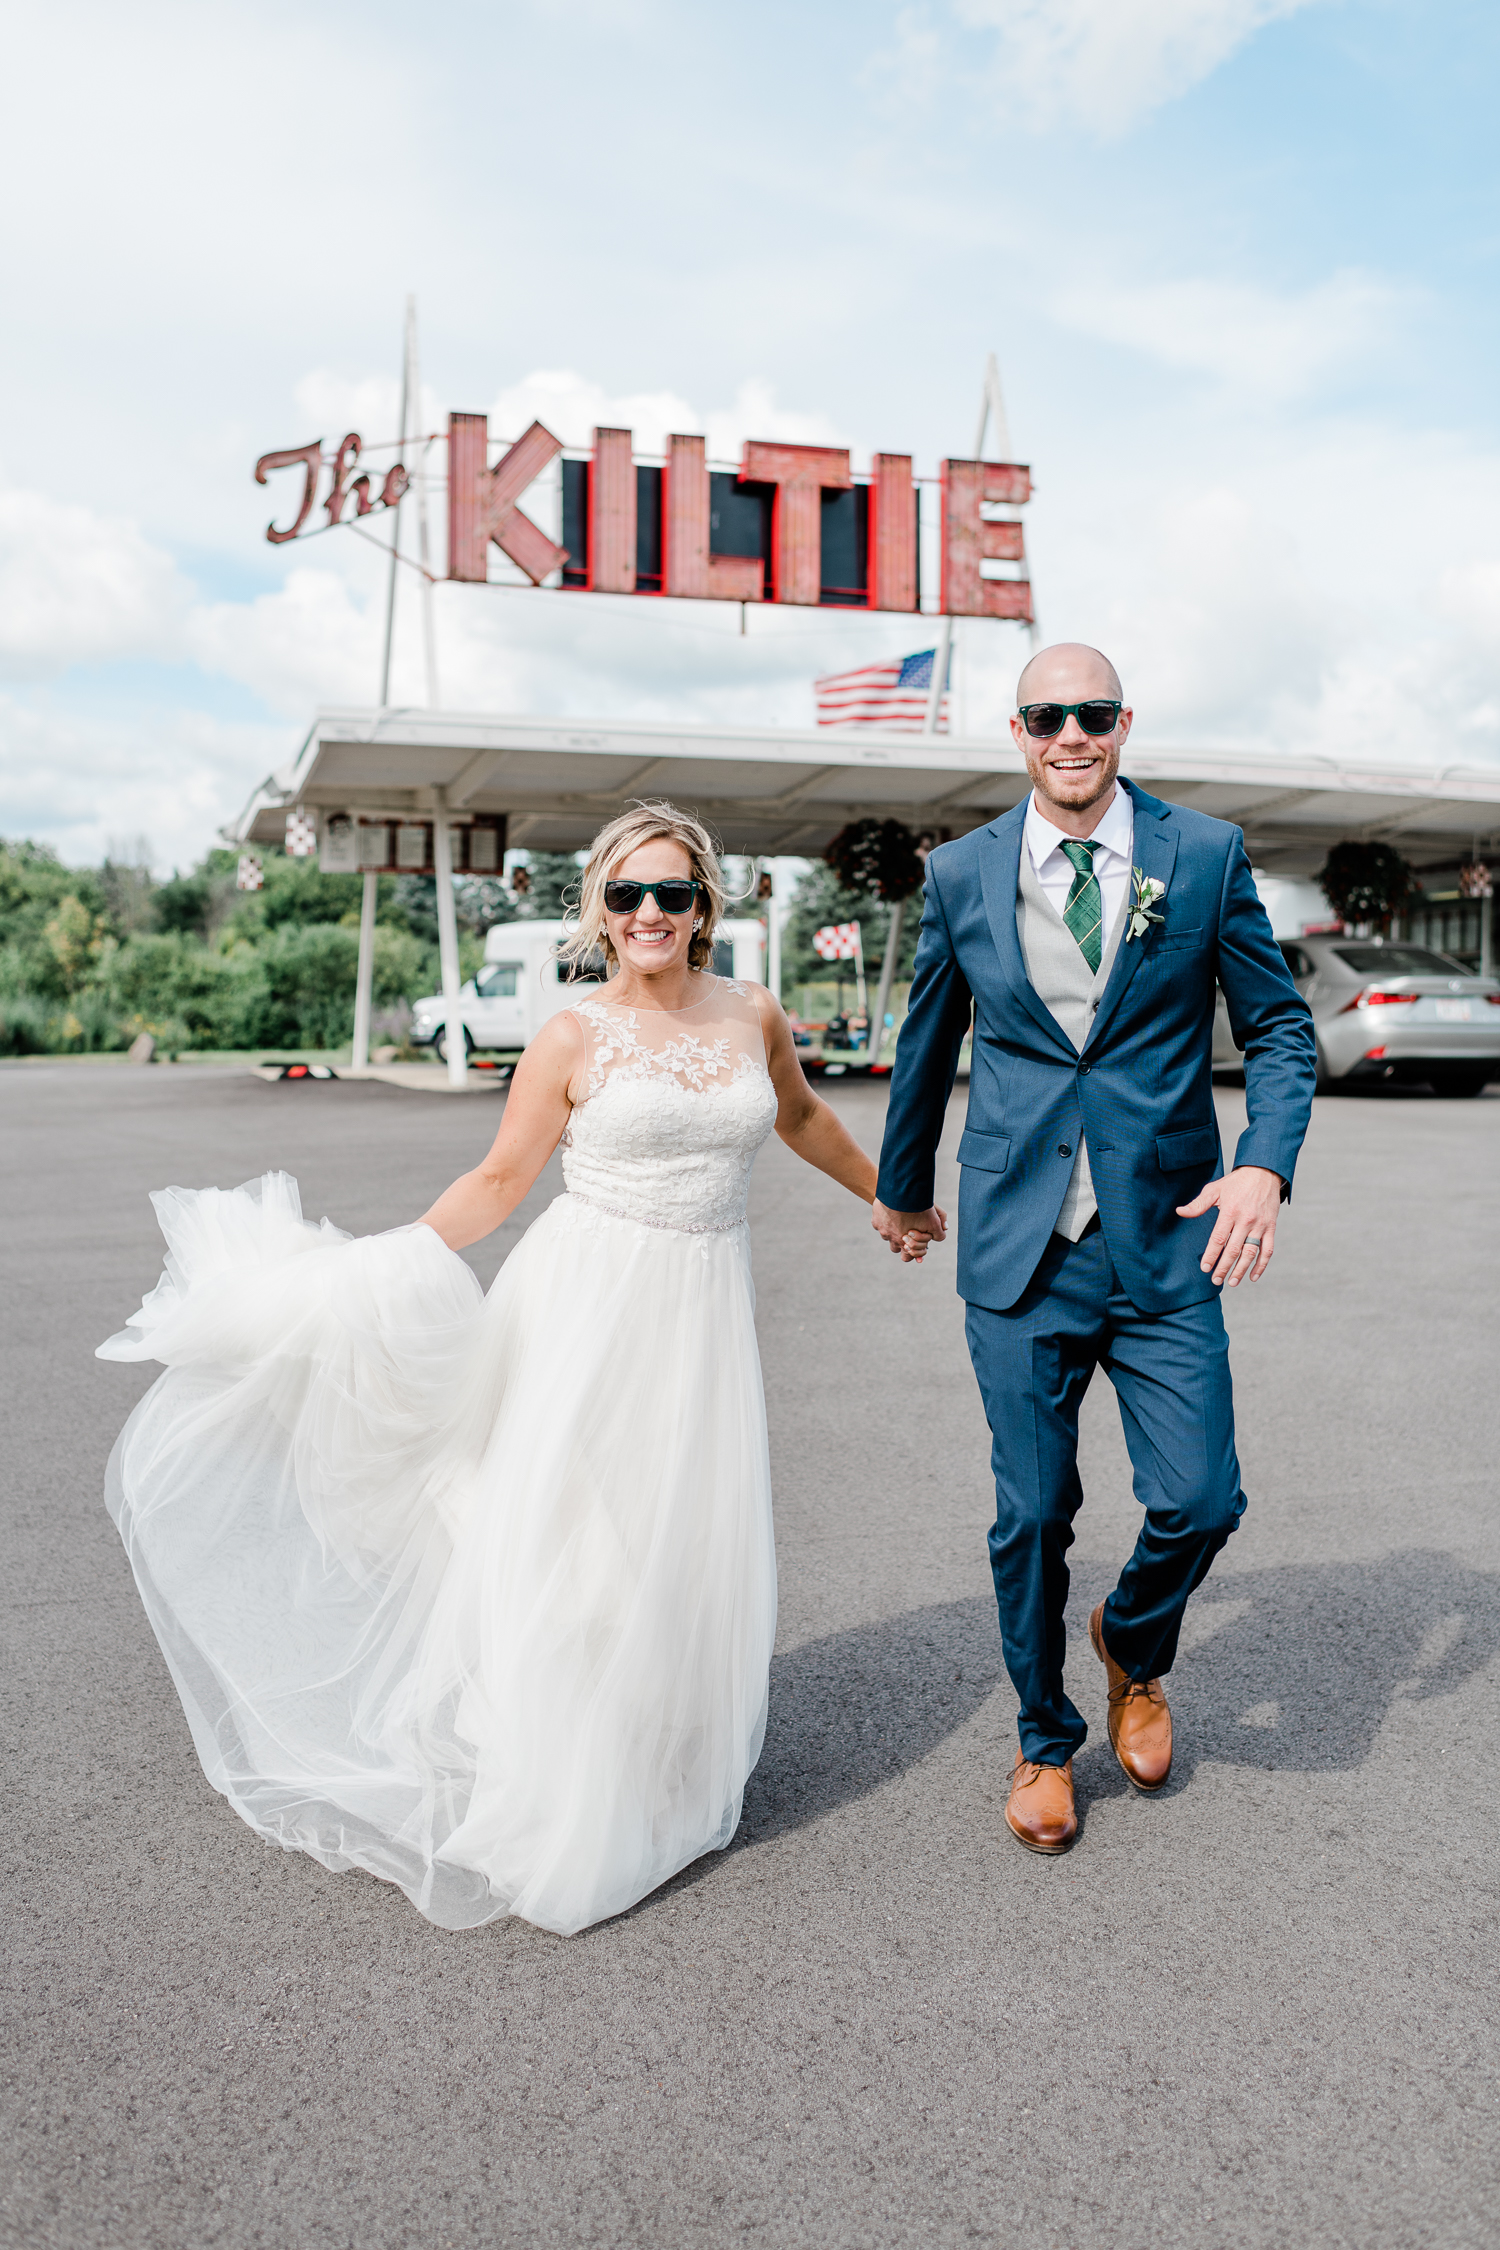 Newly married couple in wedding attire walking at the Kiltie